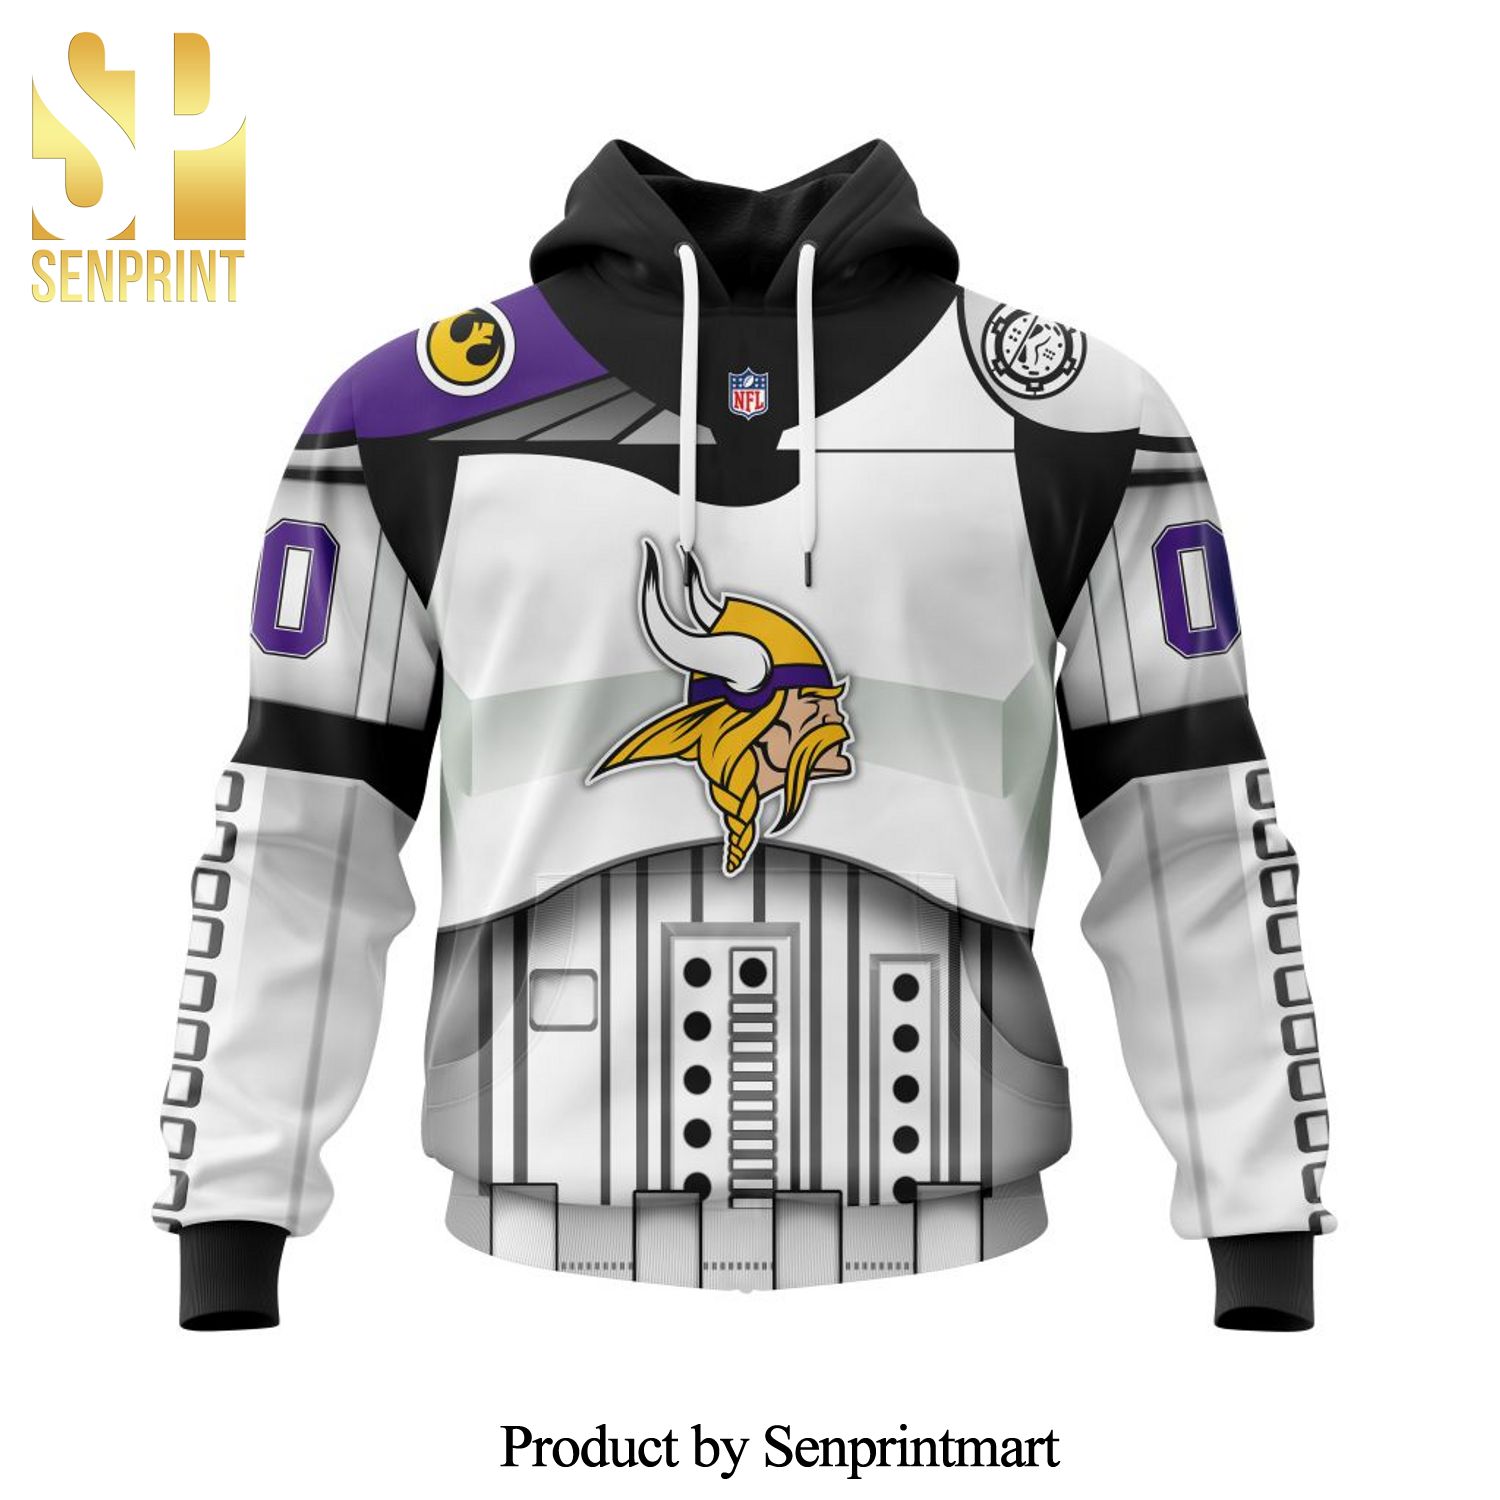 Minnesota Vikings Version Star Wars May The 4th Be With You All Over Printed Shirt